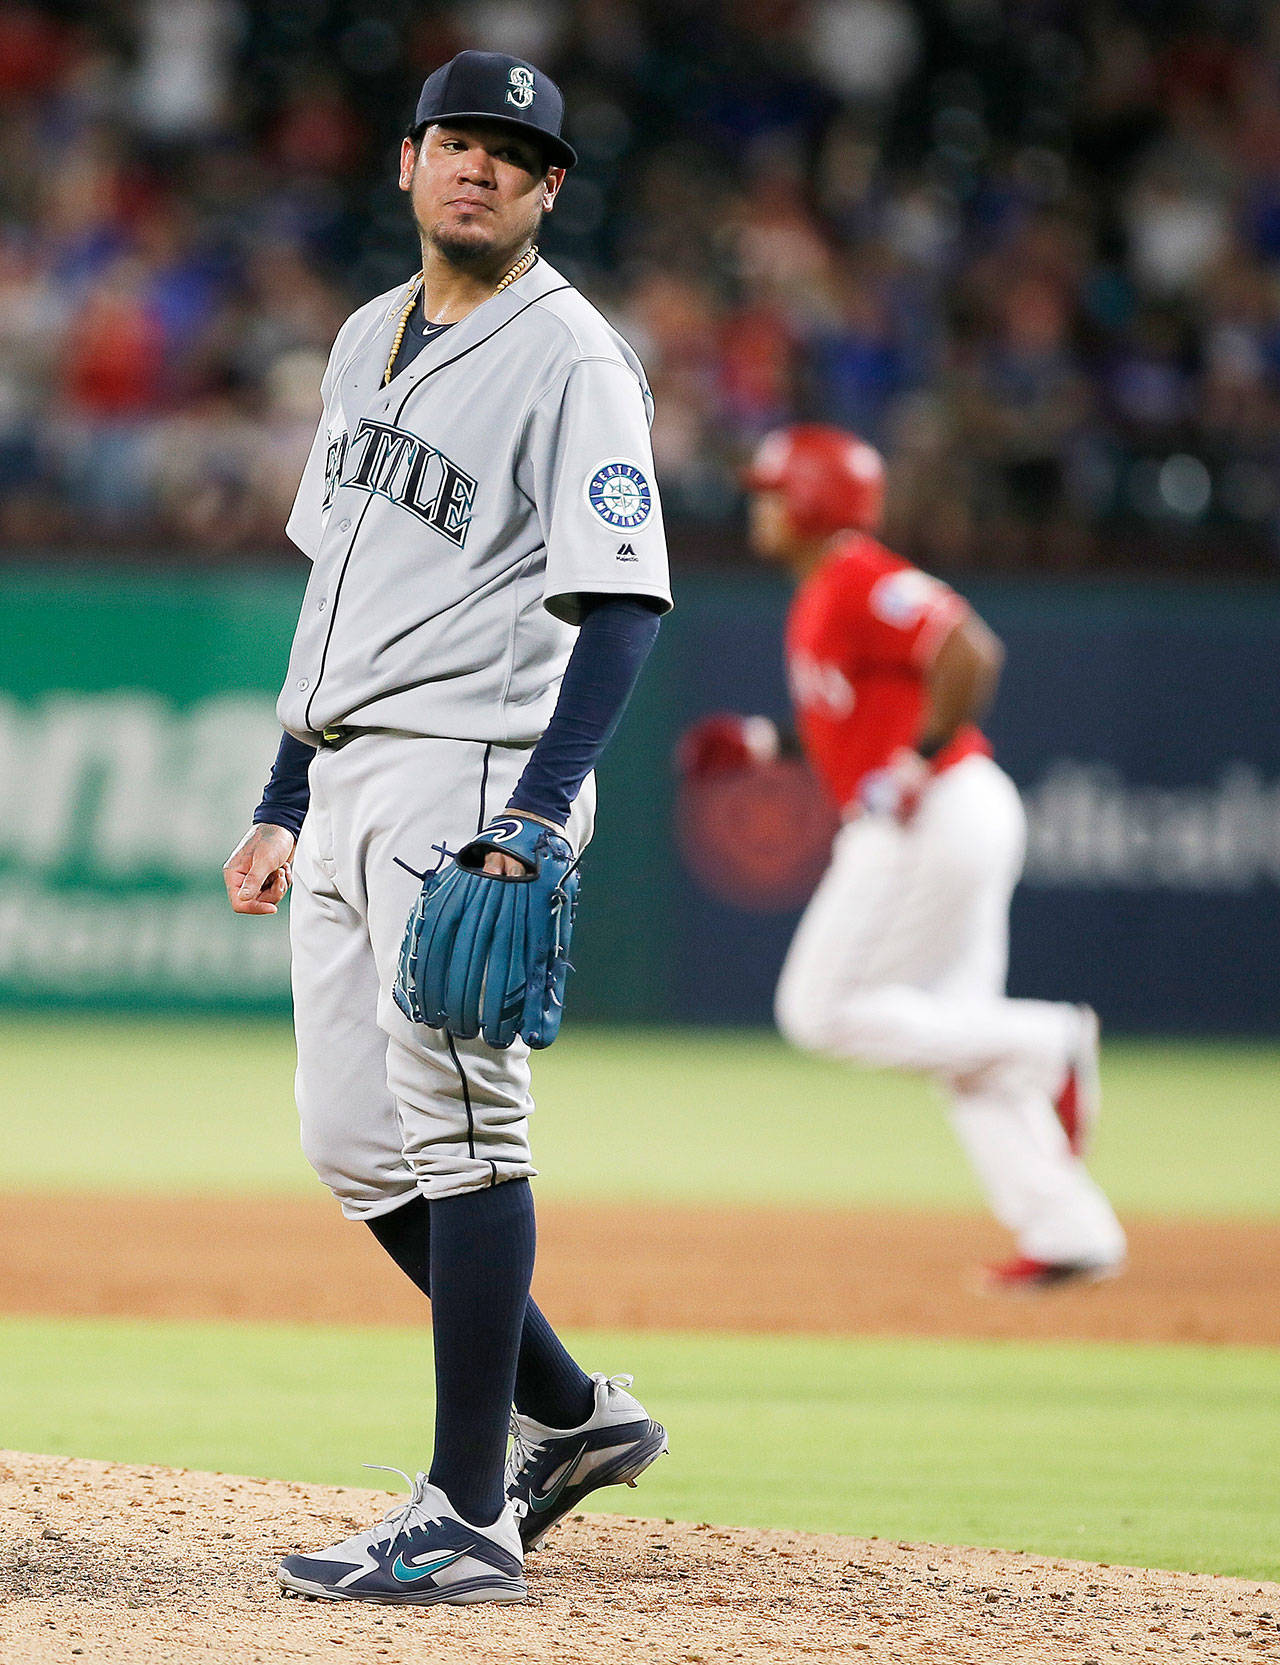 Seattle’s Felix Hernandez stands on the mound as Texas’ Adrian Beltre rounds the bases after homering off Hernandez during the sixth inning of the Mariners’ 11-4 loss to the Rangers on Tuesday in Arlington, Texas. (AP Photo/Brandon Wade)